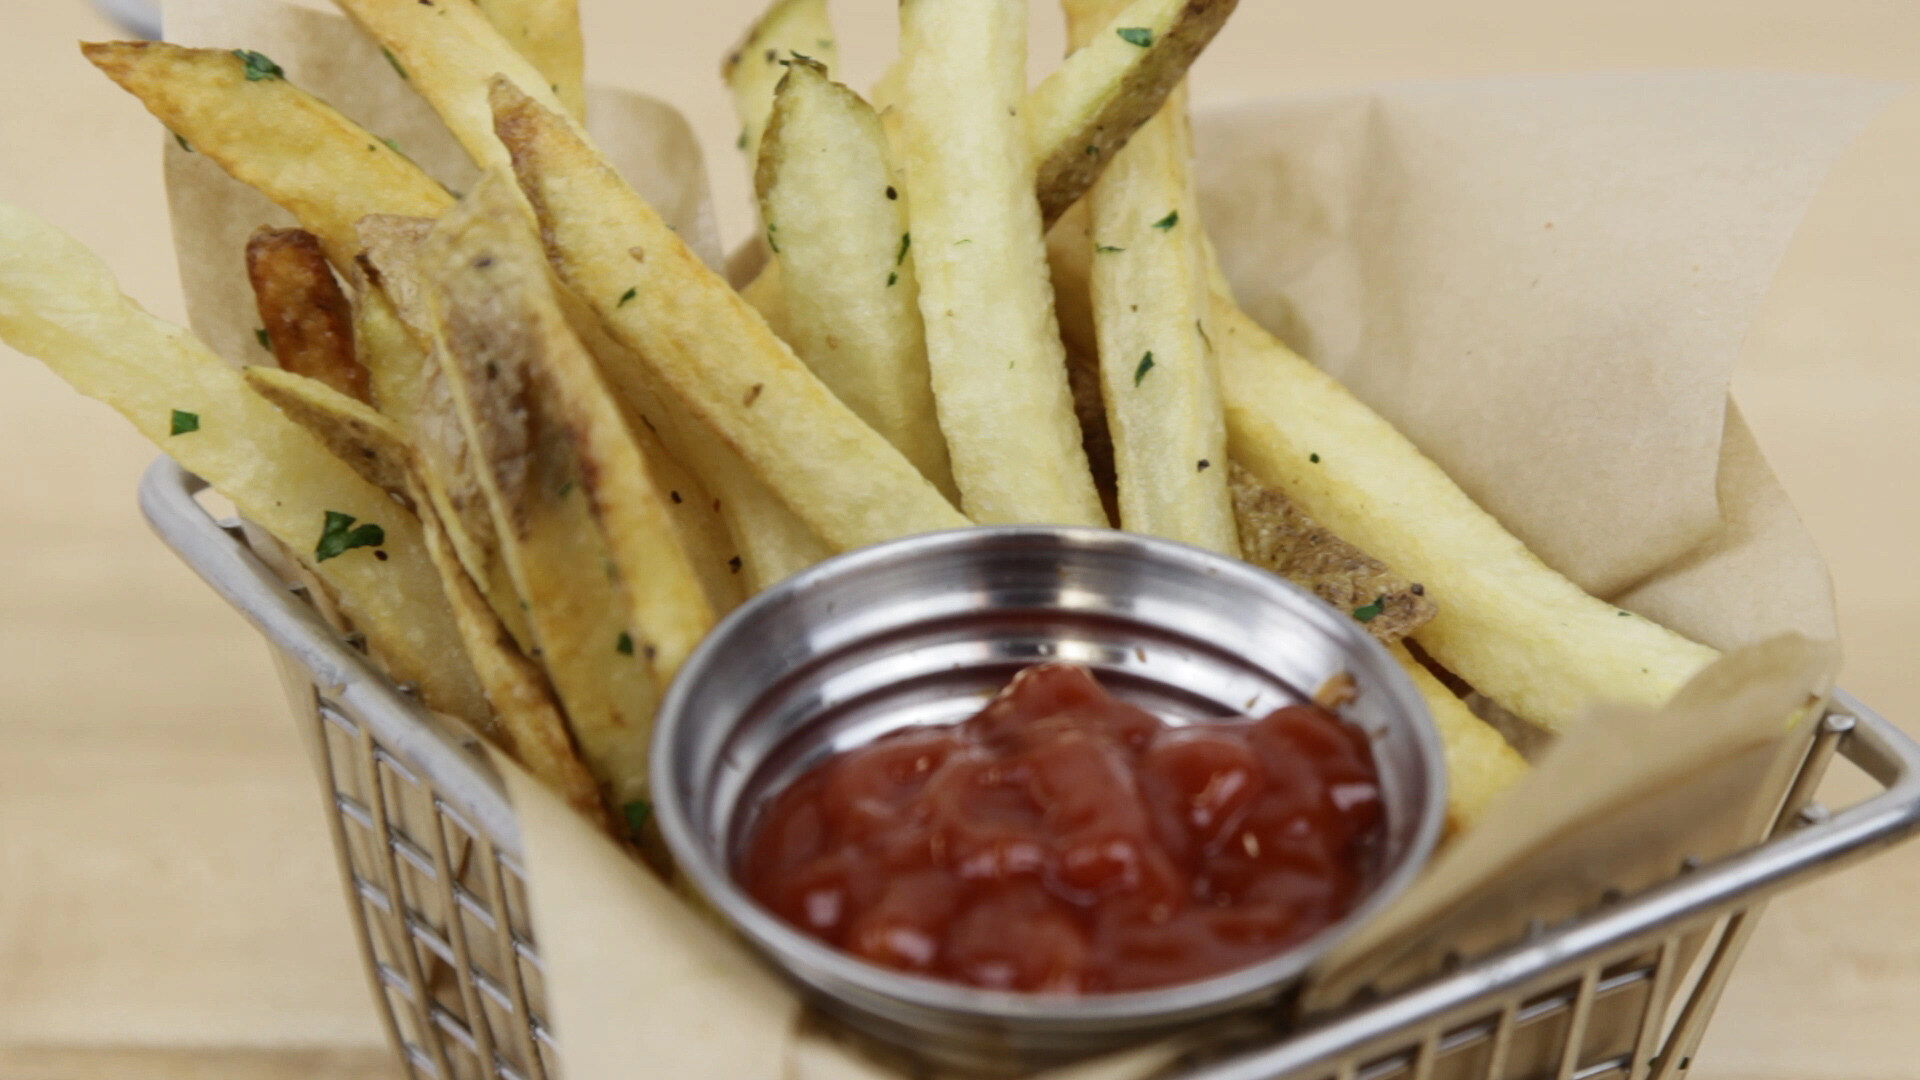 Select 3/8 Straight Cut Fries